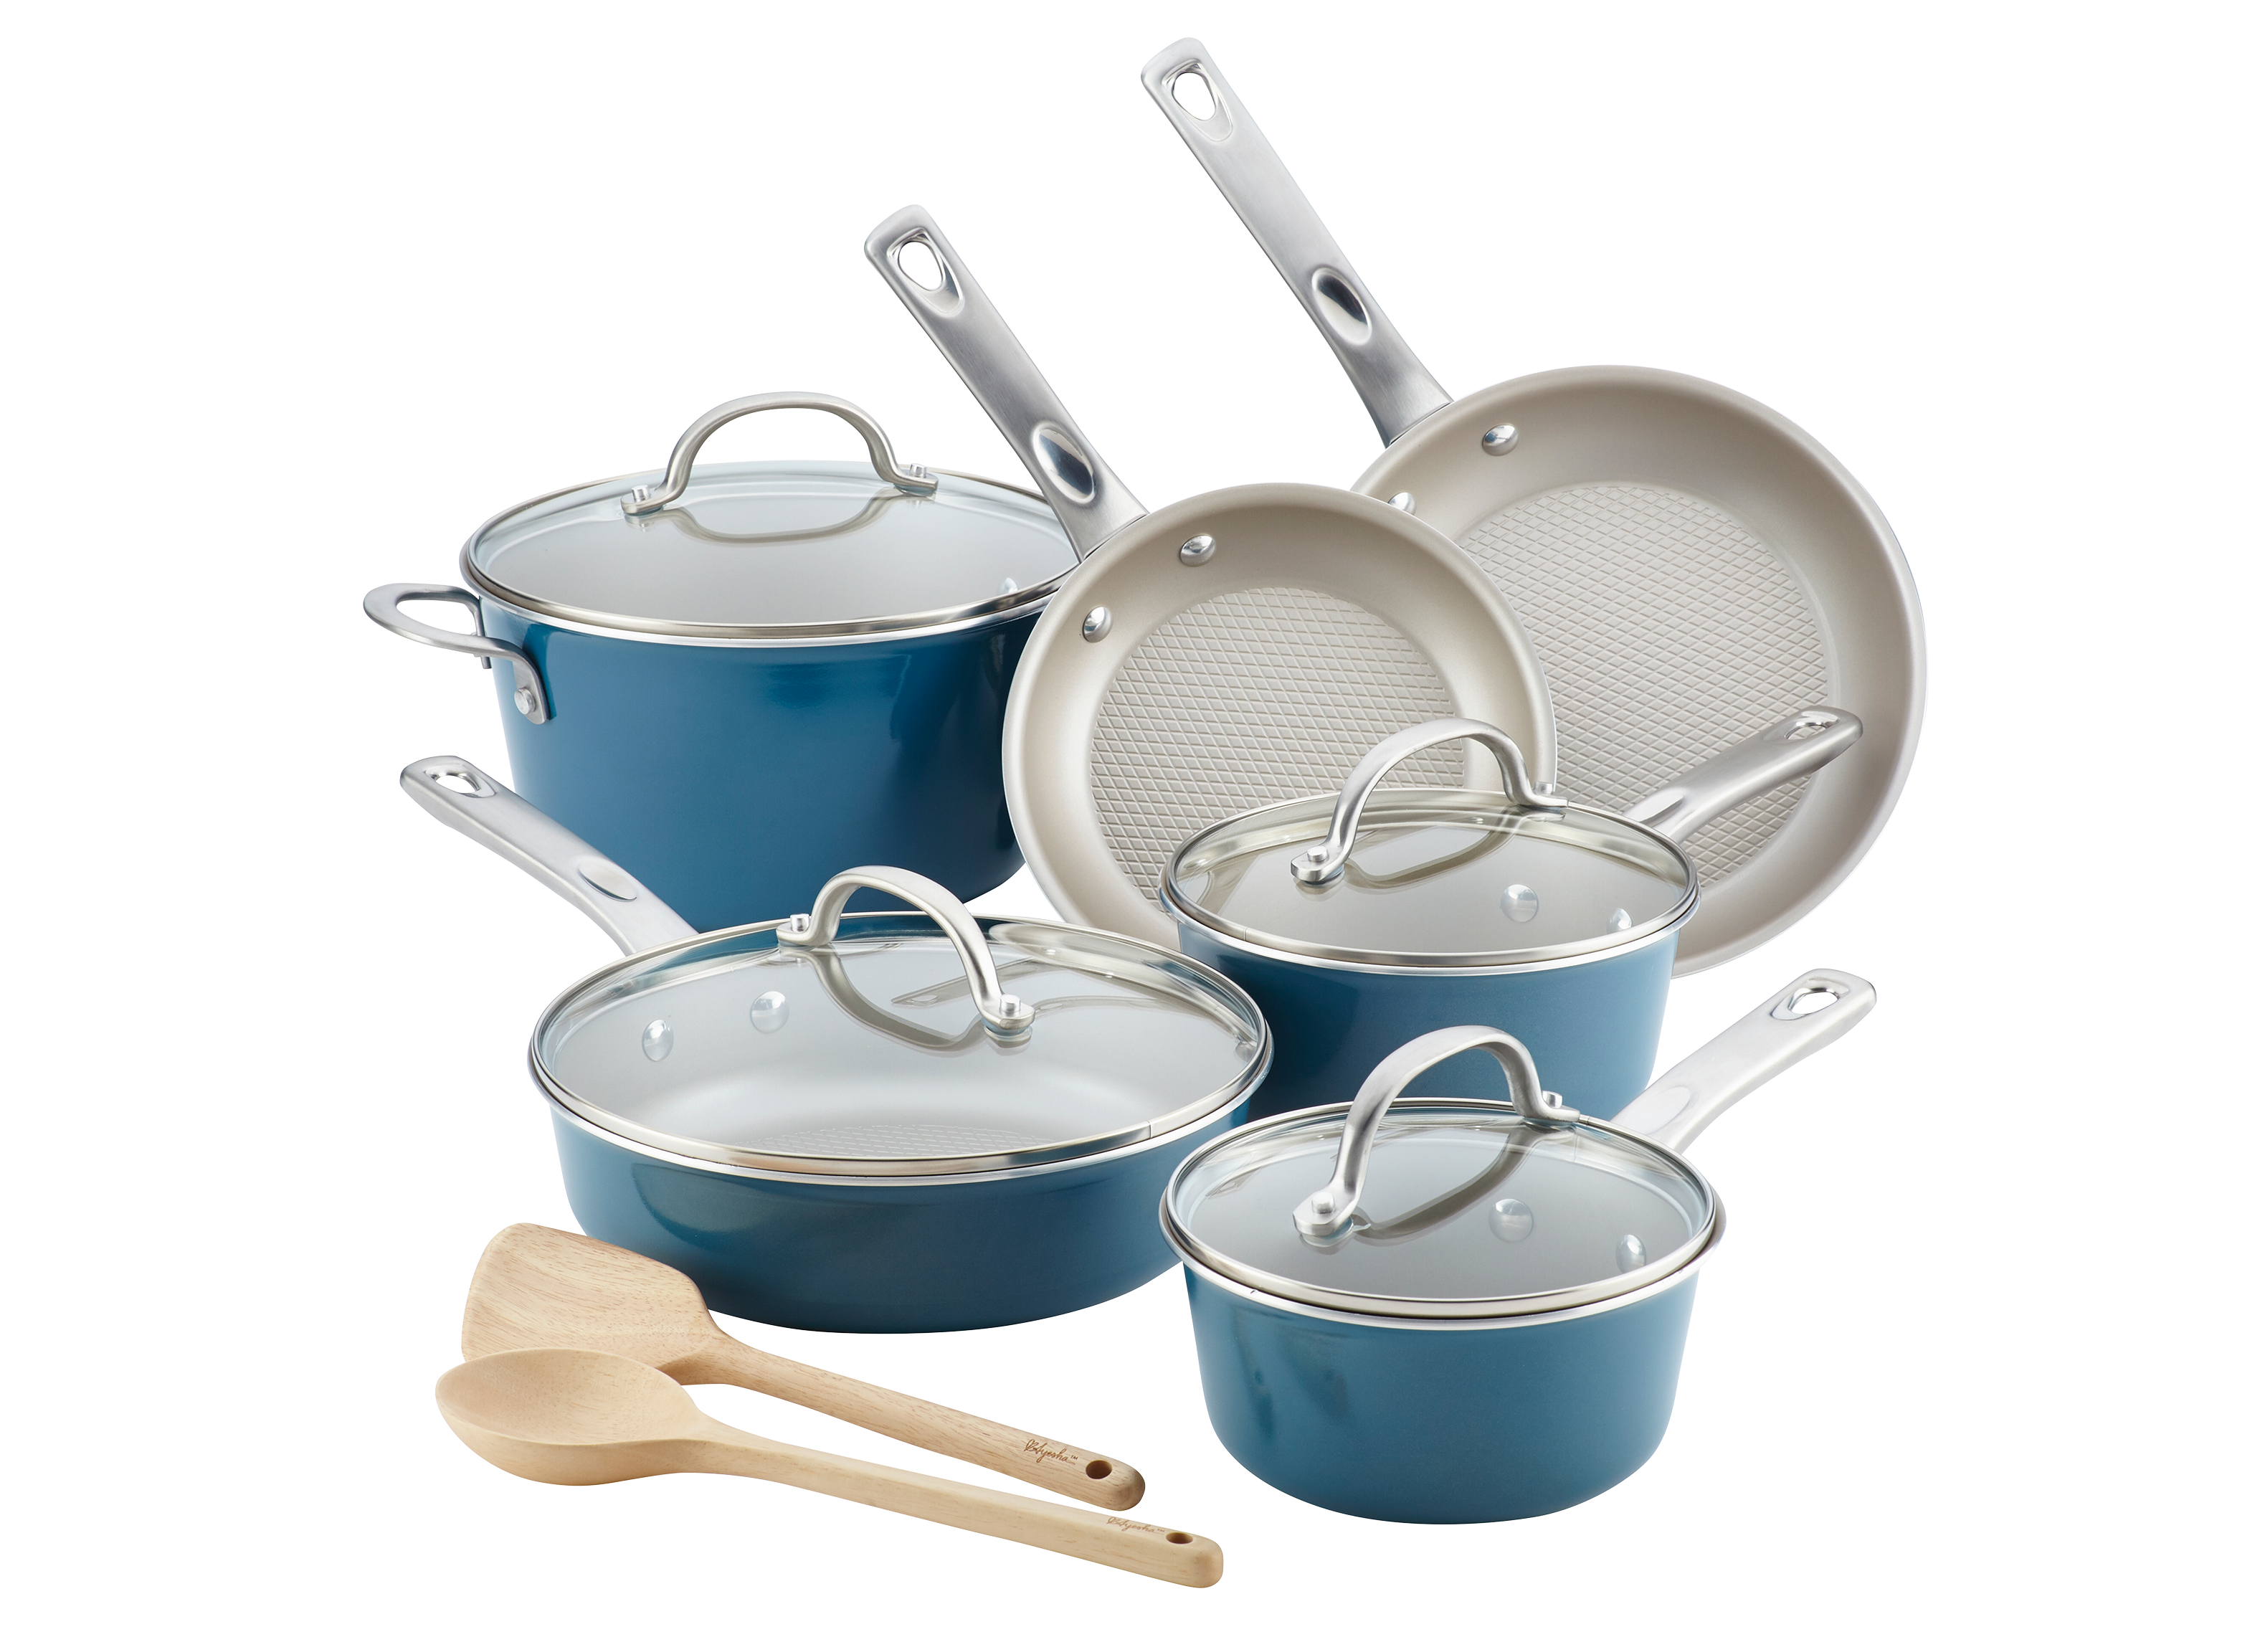 https://crdms.images.consumerreports.org/prod/products/cr/models/394757-non-stick-cookware-ayesha-curry-home-collection-porcelain-enamel-nonstick-61505.png